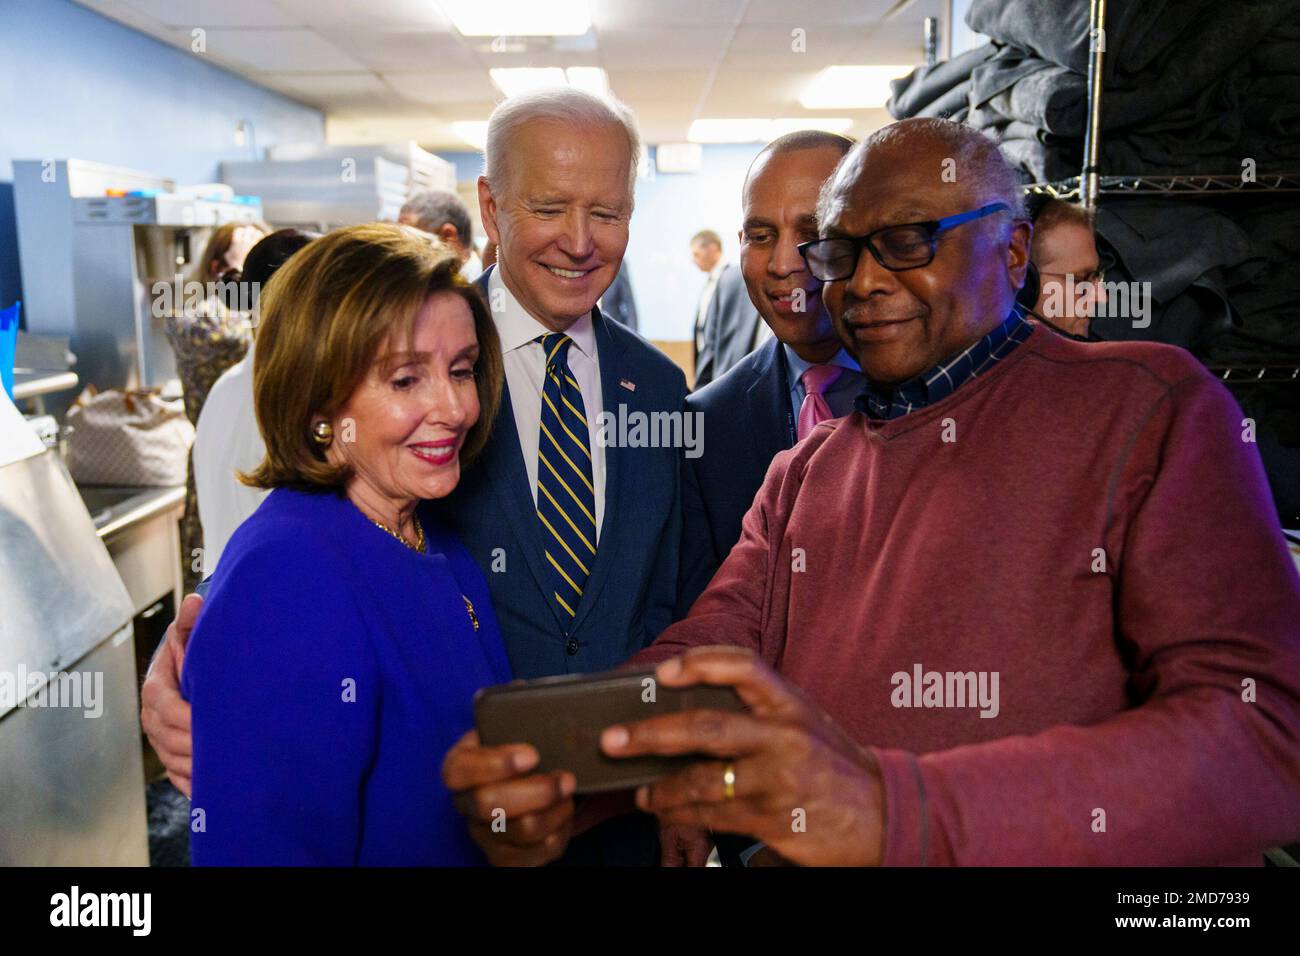 Reportage: President Joe Biden poses for a selfie with Speaker Nancy Pelosi (Calif.), Chairman of the House Democratic Caucus Hakeem Jeffries (N.Y.) and Majority Whip Jim Clyburn (S.C.) Friday, March 11, 2022 Stock Photo